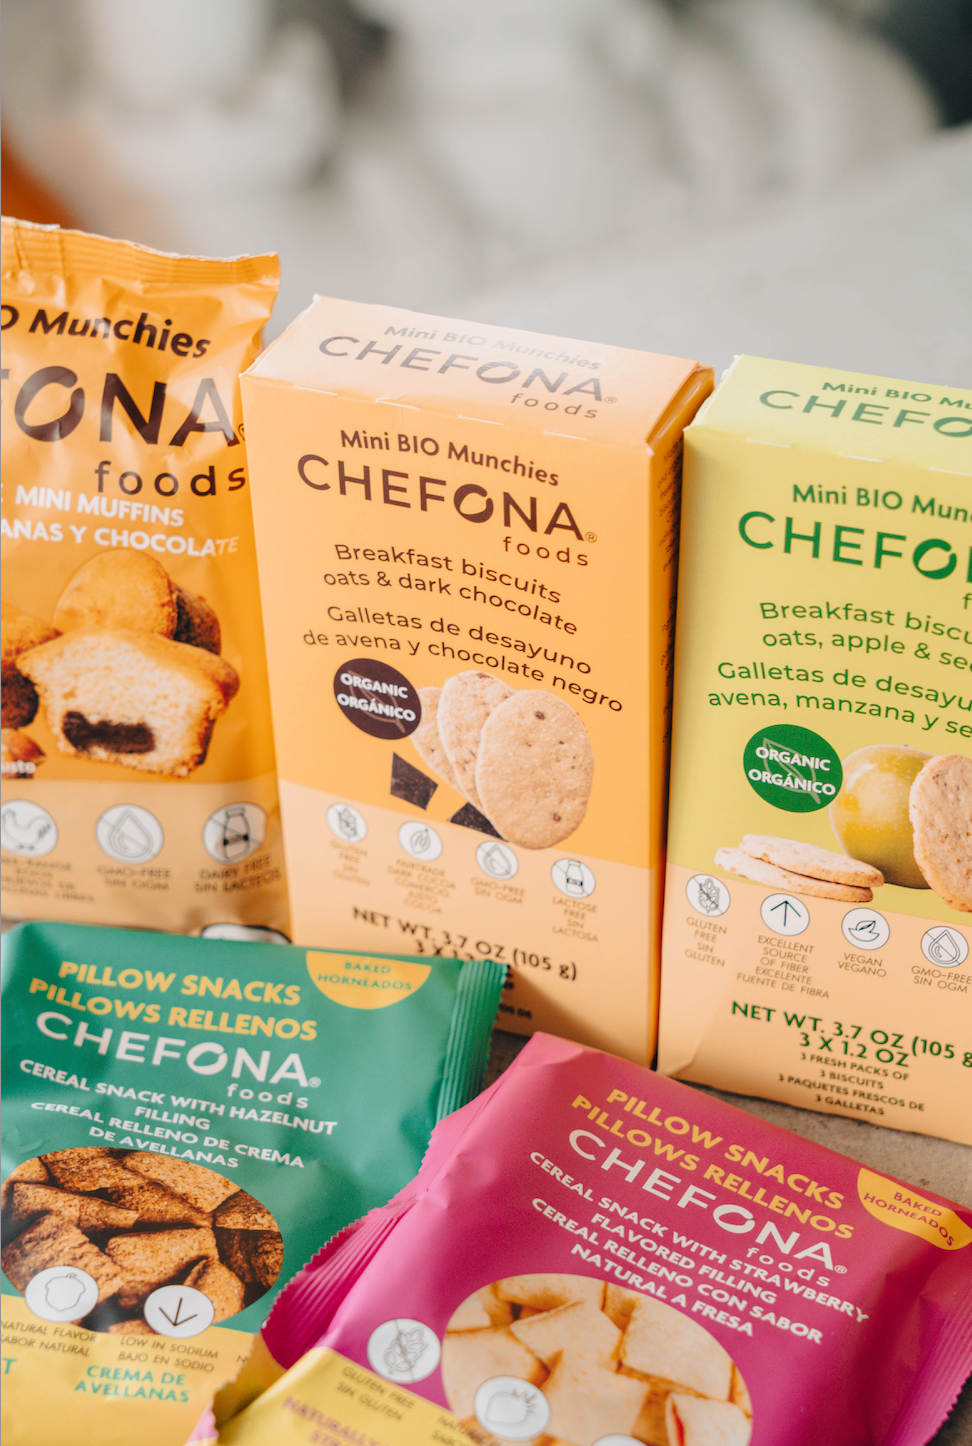 The Power of Chefona Foods' Organic Ingredients